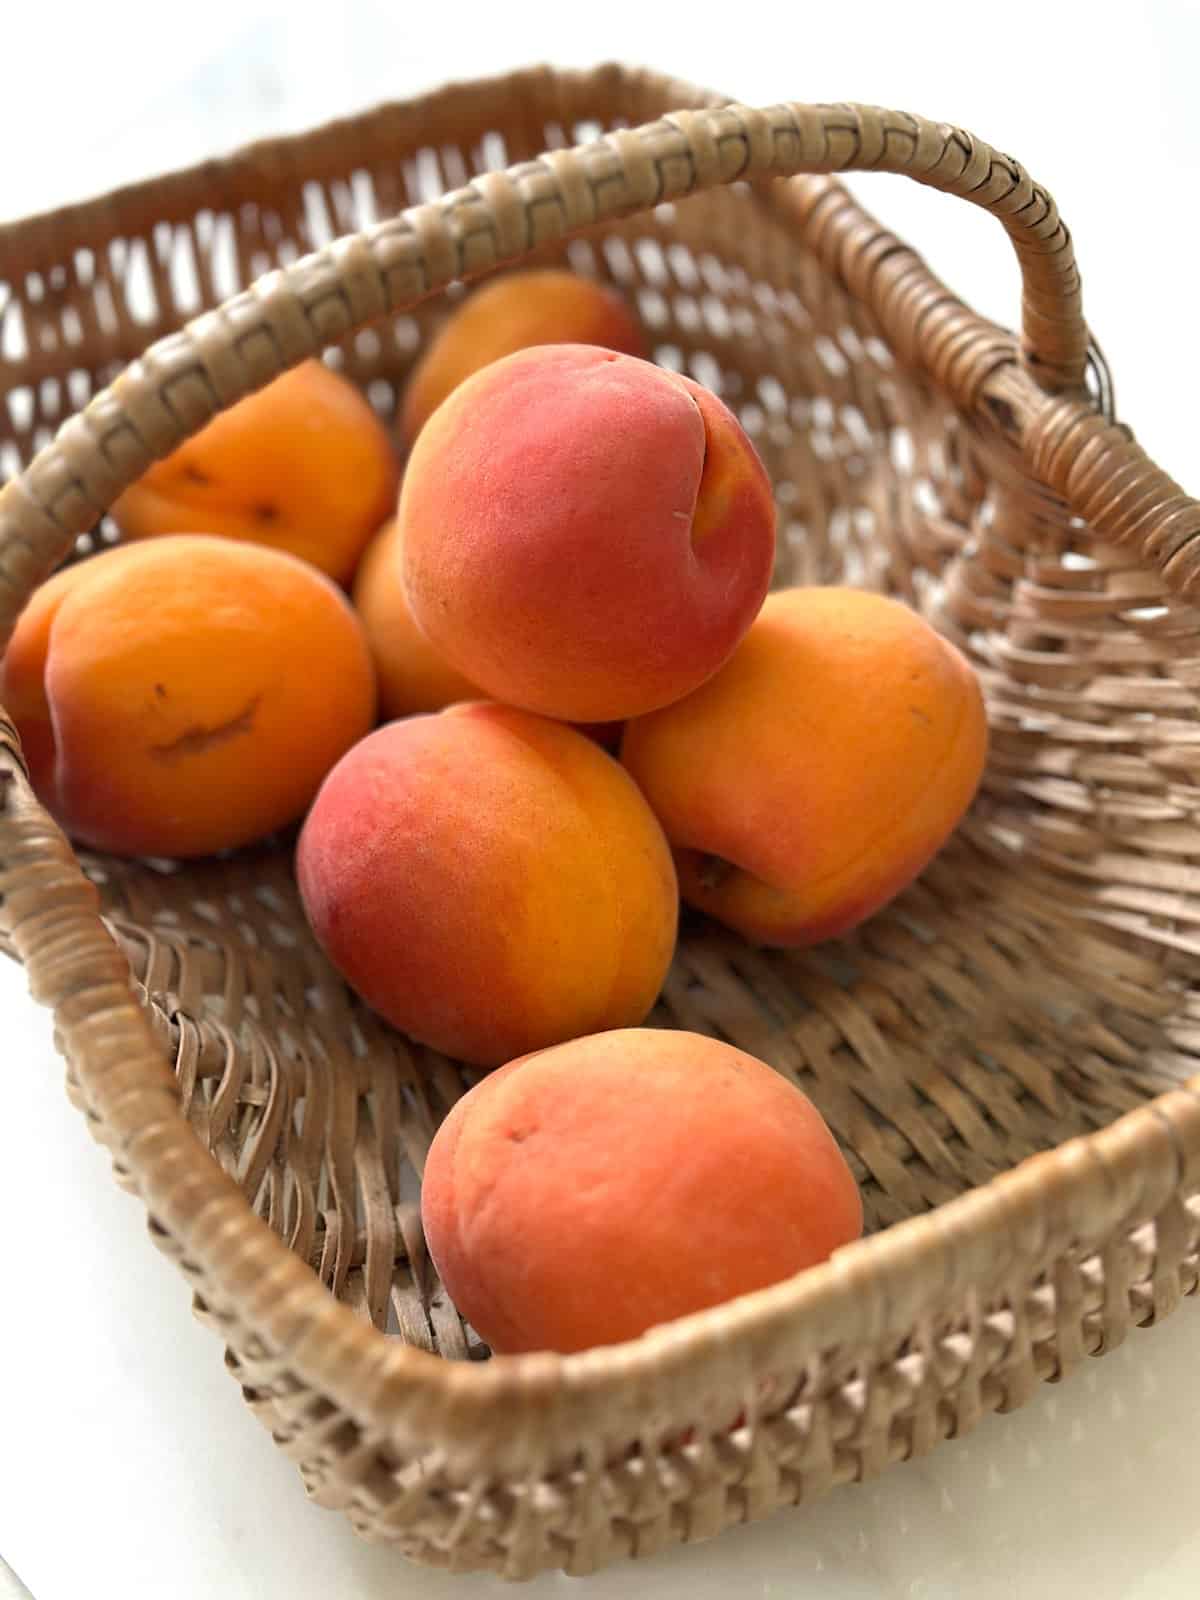 French apricots in a basket